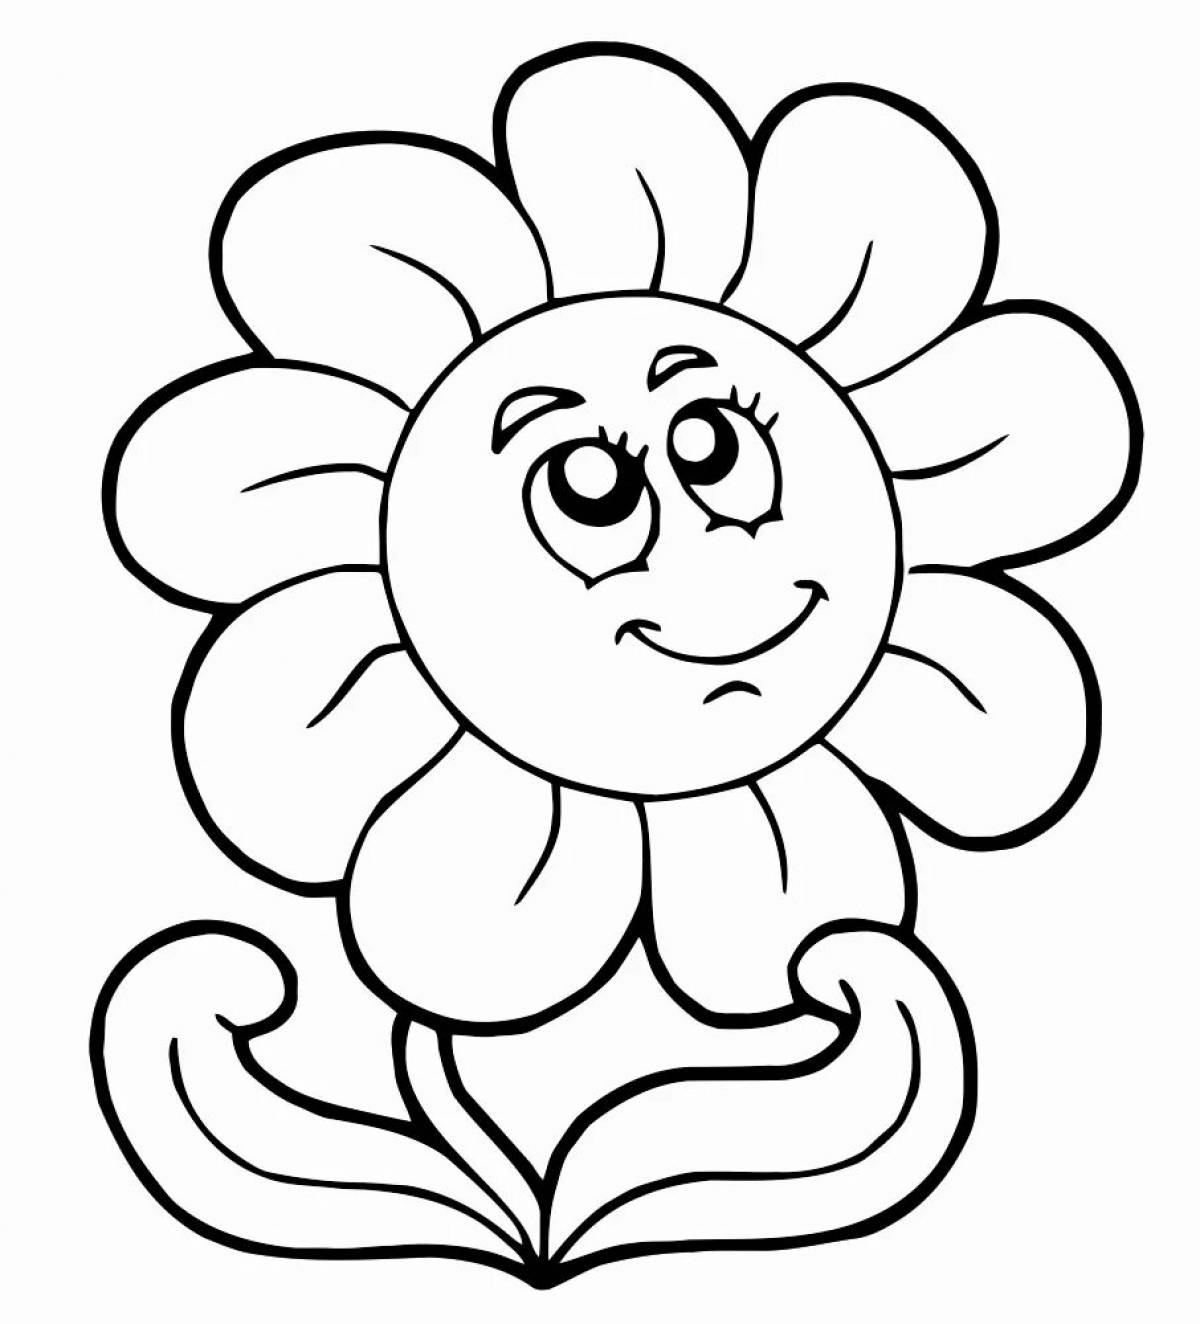 Living flower coloring for children 4-5 years old